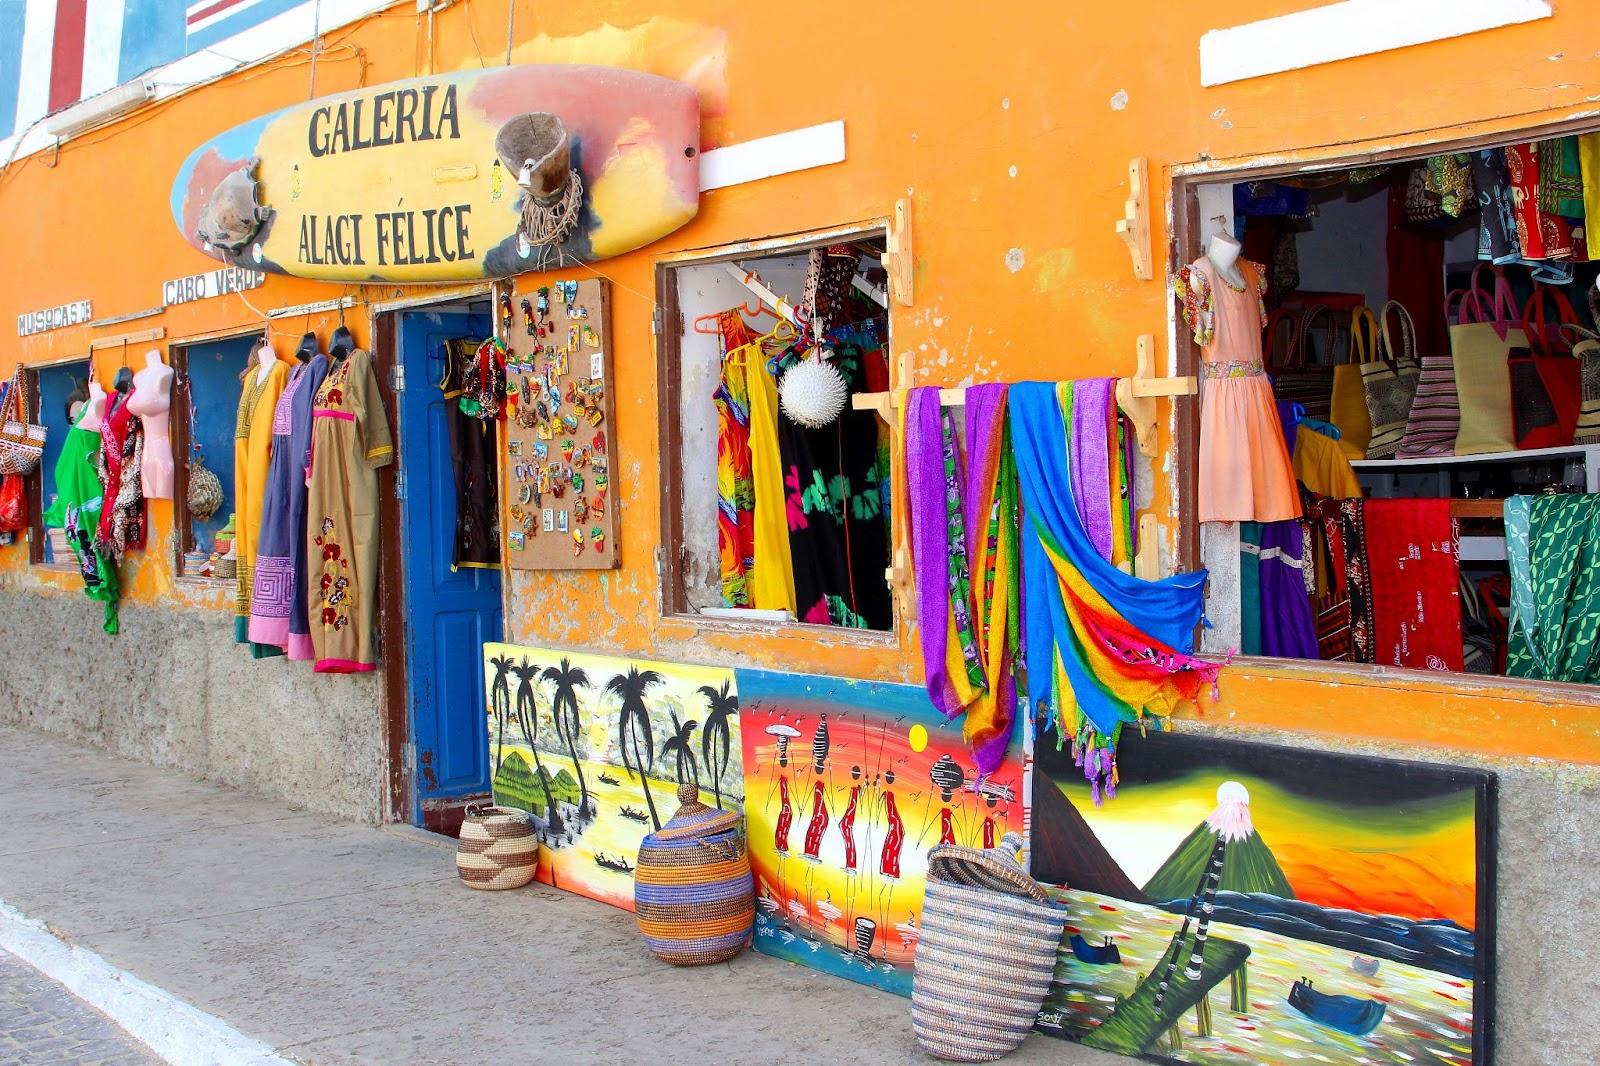 Sal. Cape Verde. Display of typical local products, paintings, crafts, clothing, souvenirs and surfboard on orange wall in outdoor street